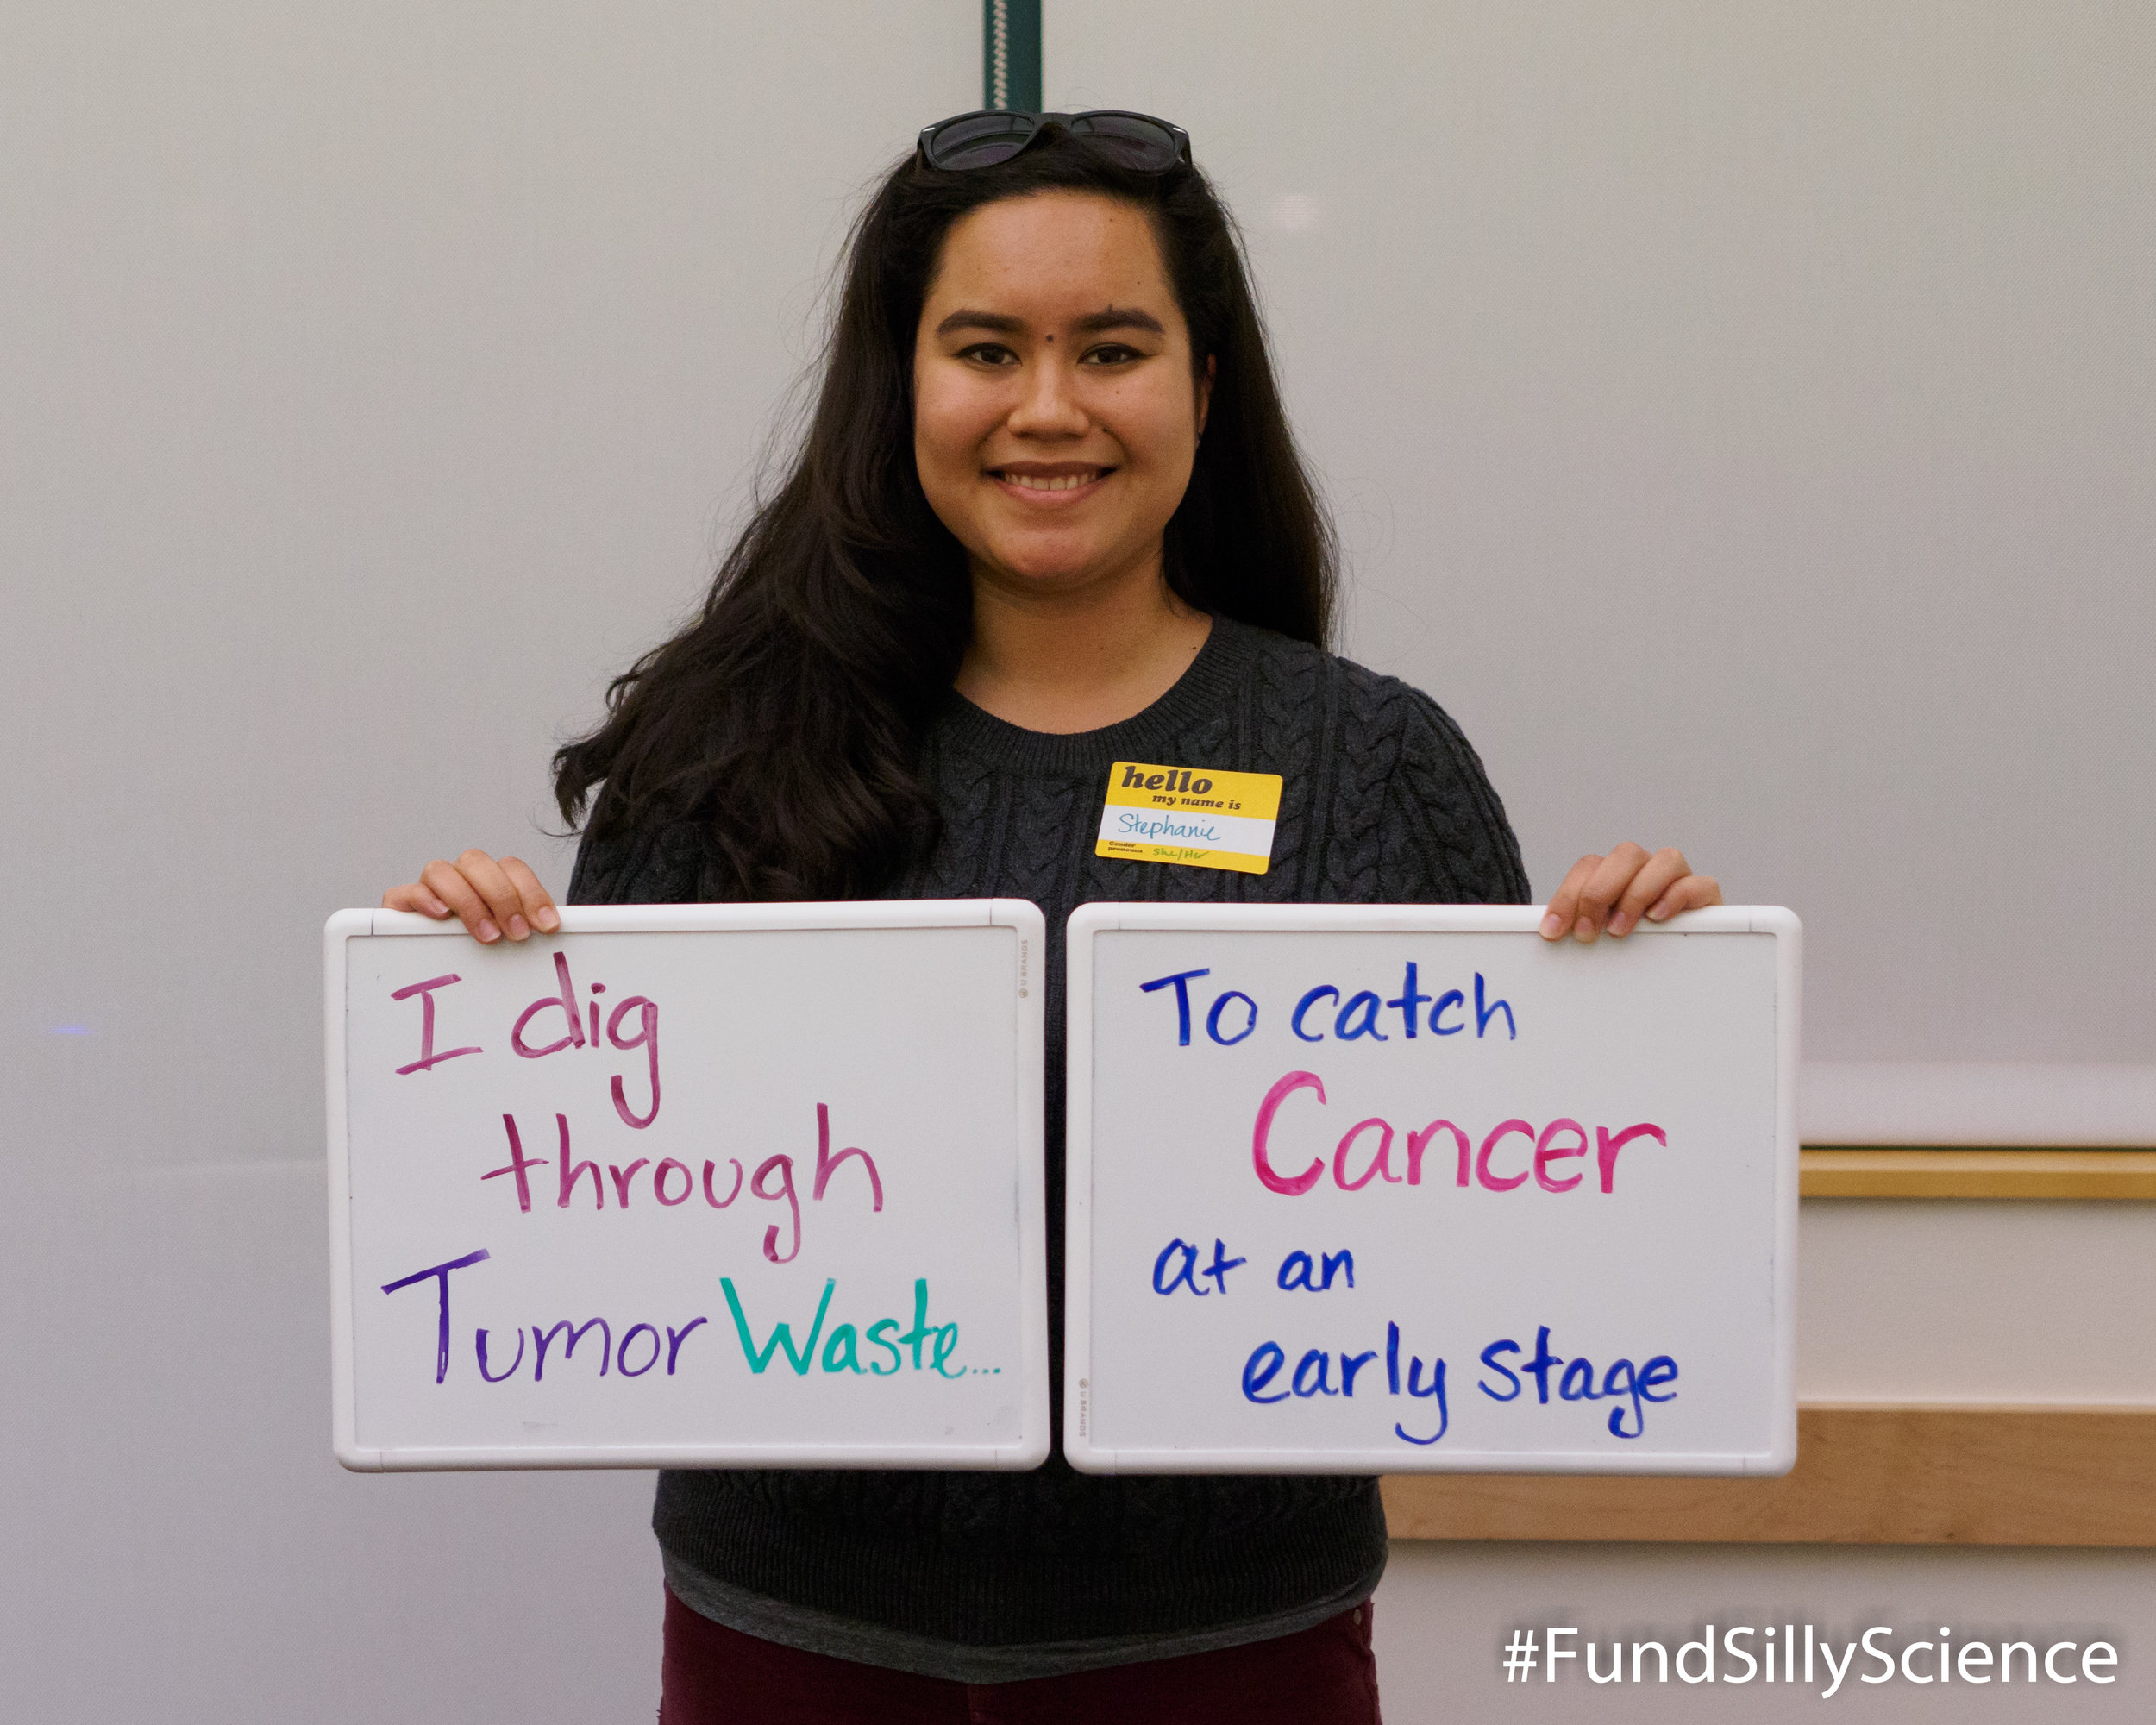  This is Stephanie, a research associate at Stanford. “Tumors shed DNA in the blood. We can extract that DNA, decode its sequence and create a profile specific to any type of cancer.” 